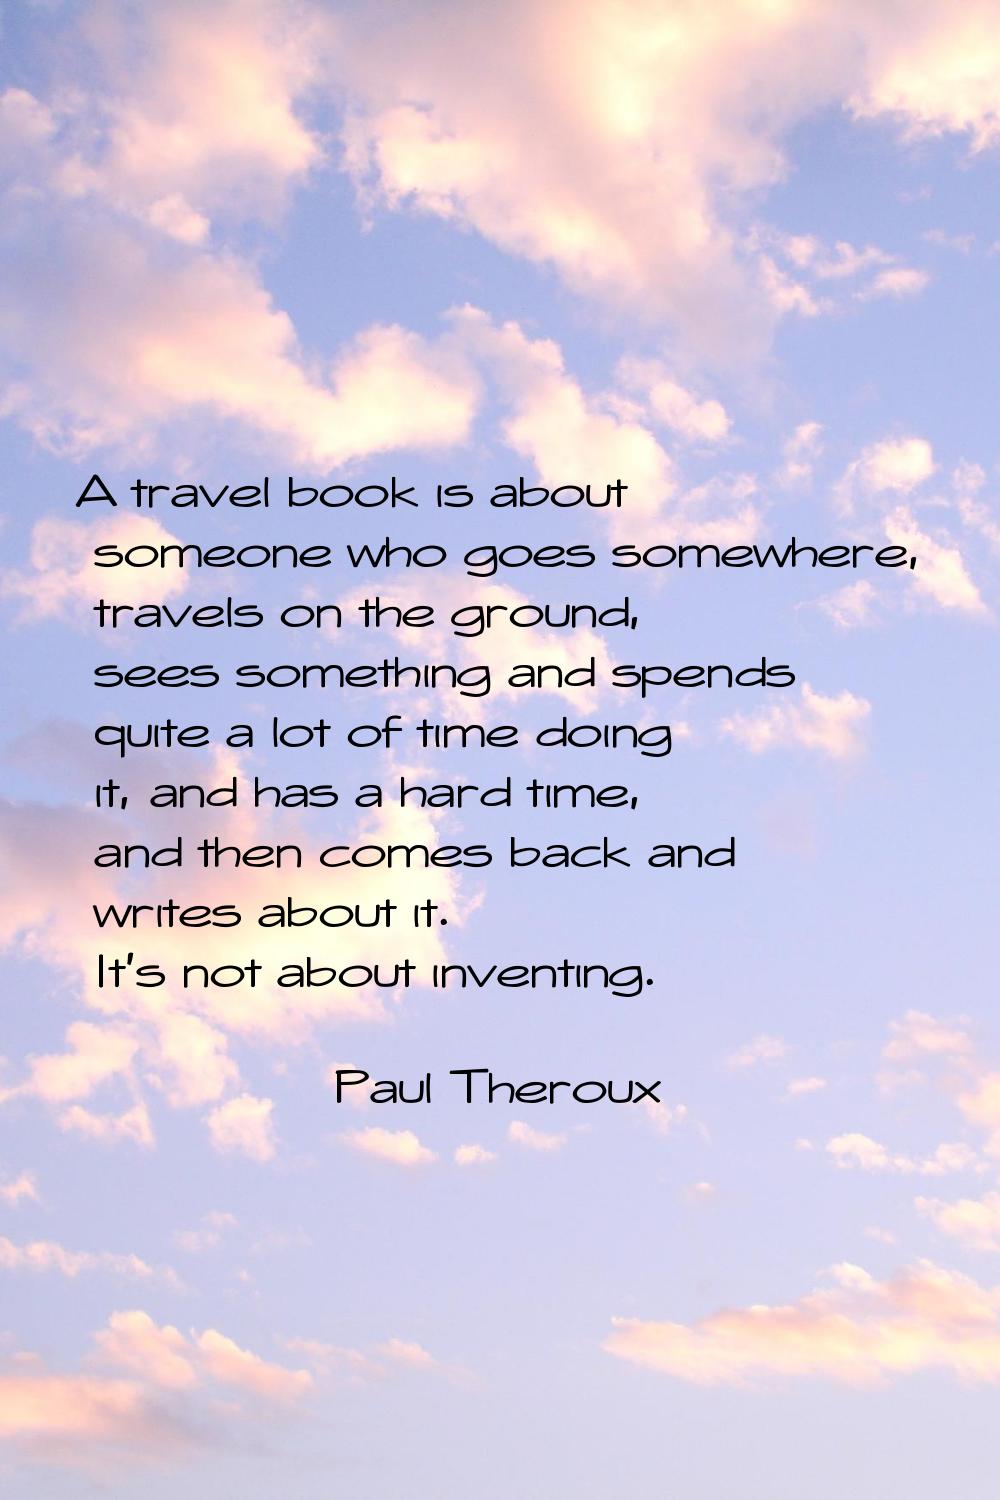 A travel book is about someone who goes somewhere, travels on the ground, sees something and spends